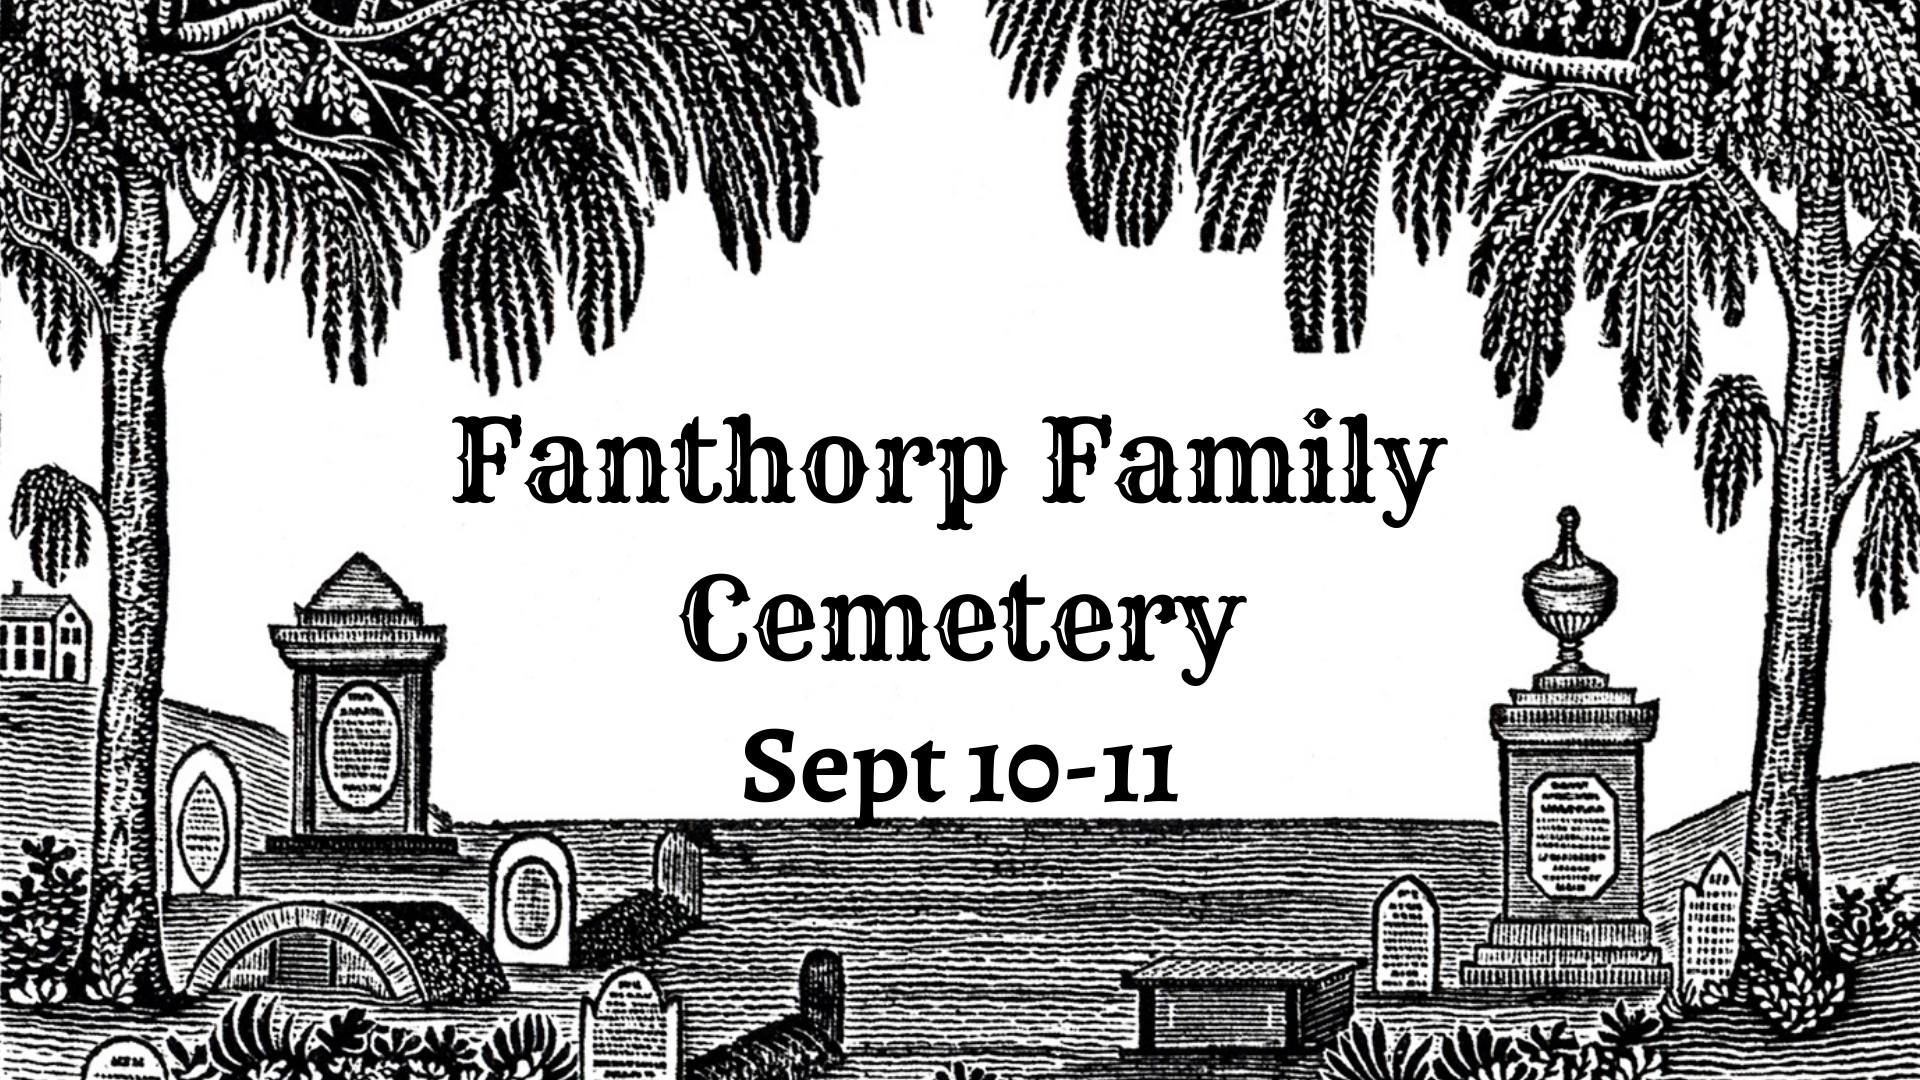 Fanthorp Focus Weekend: Fanthorp Family Cemetery